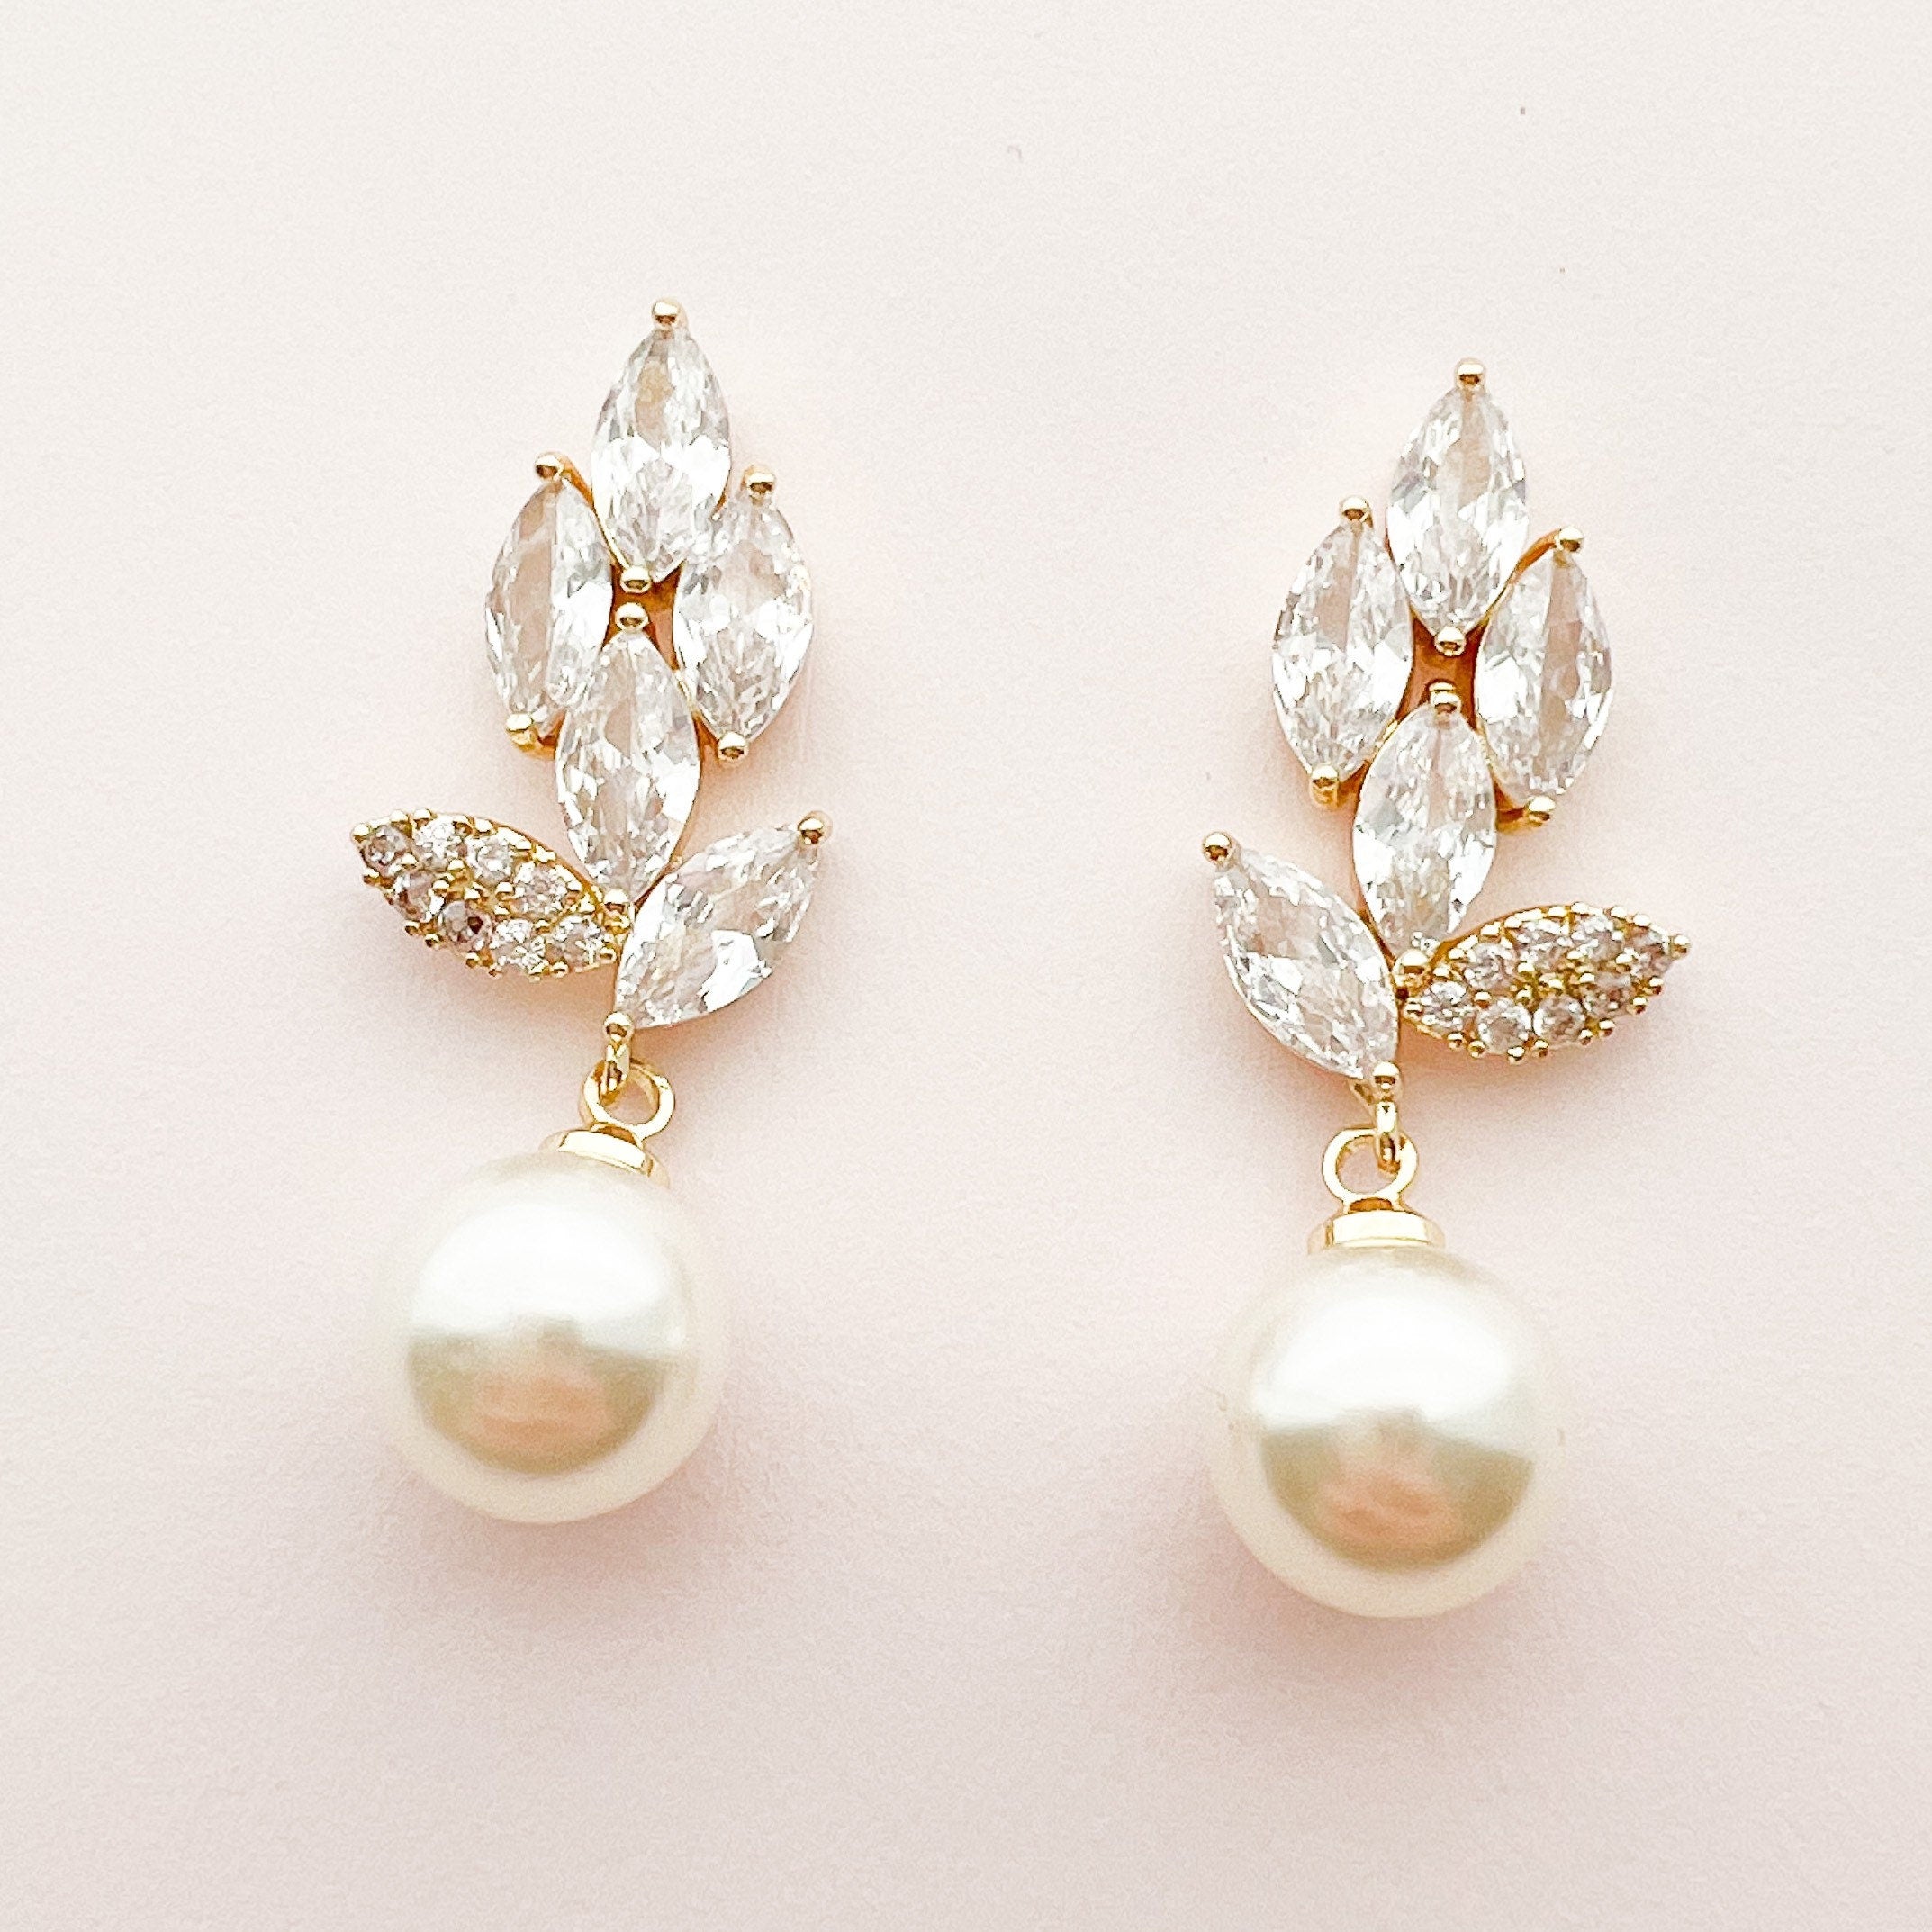 LIV // Gold crystal and pearl earrings